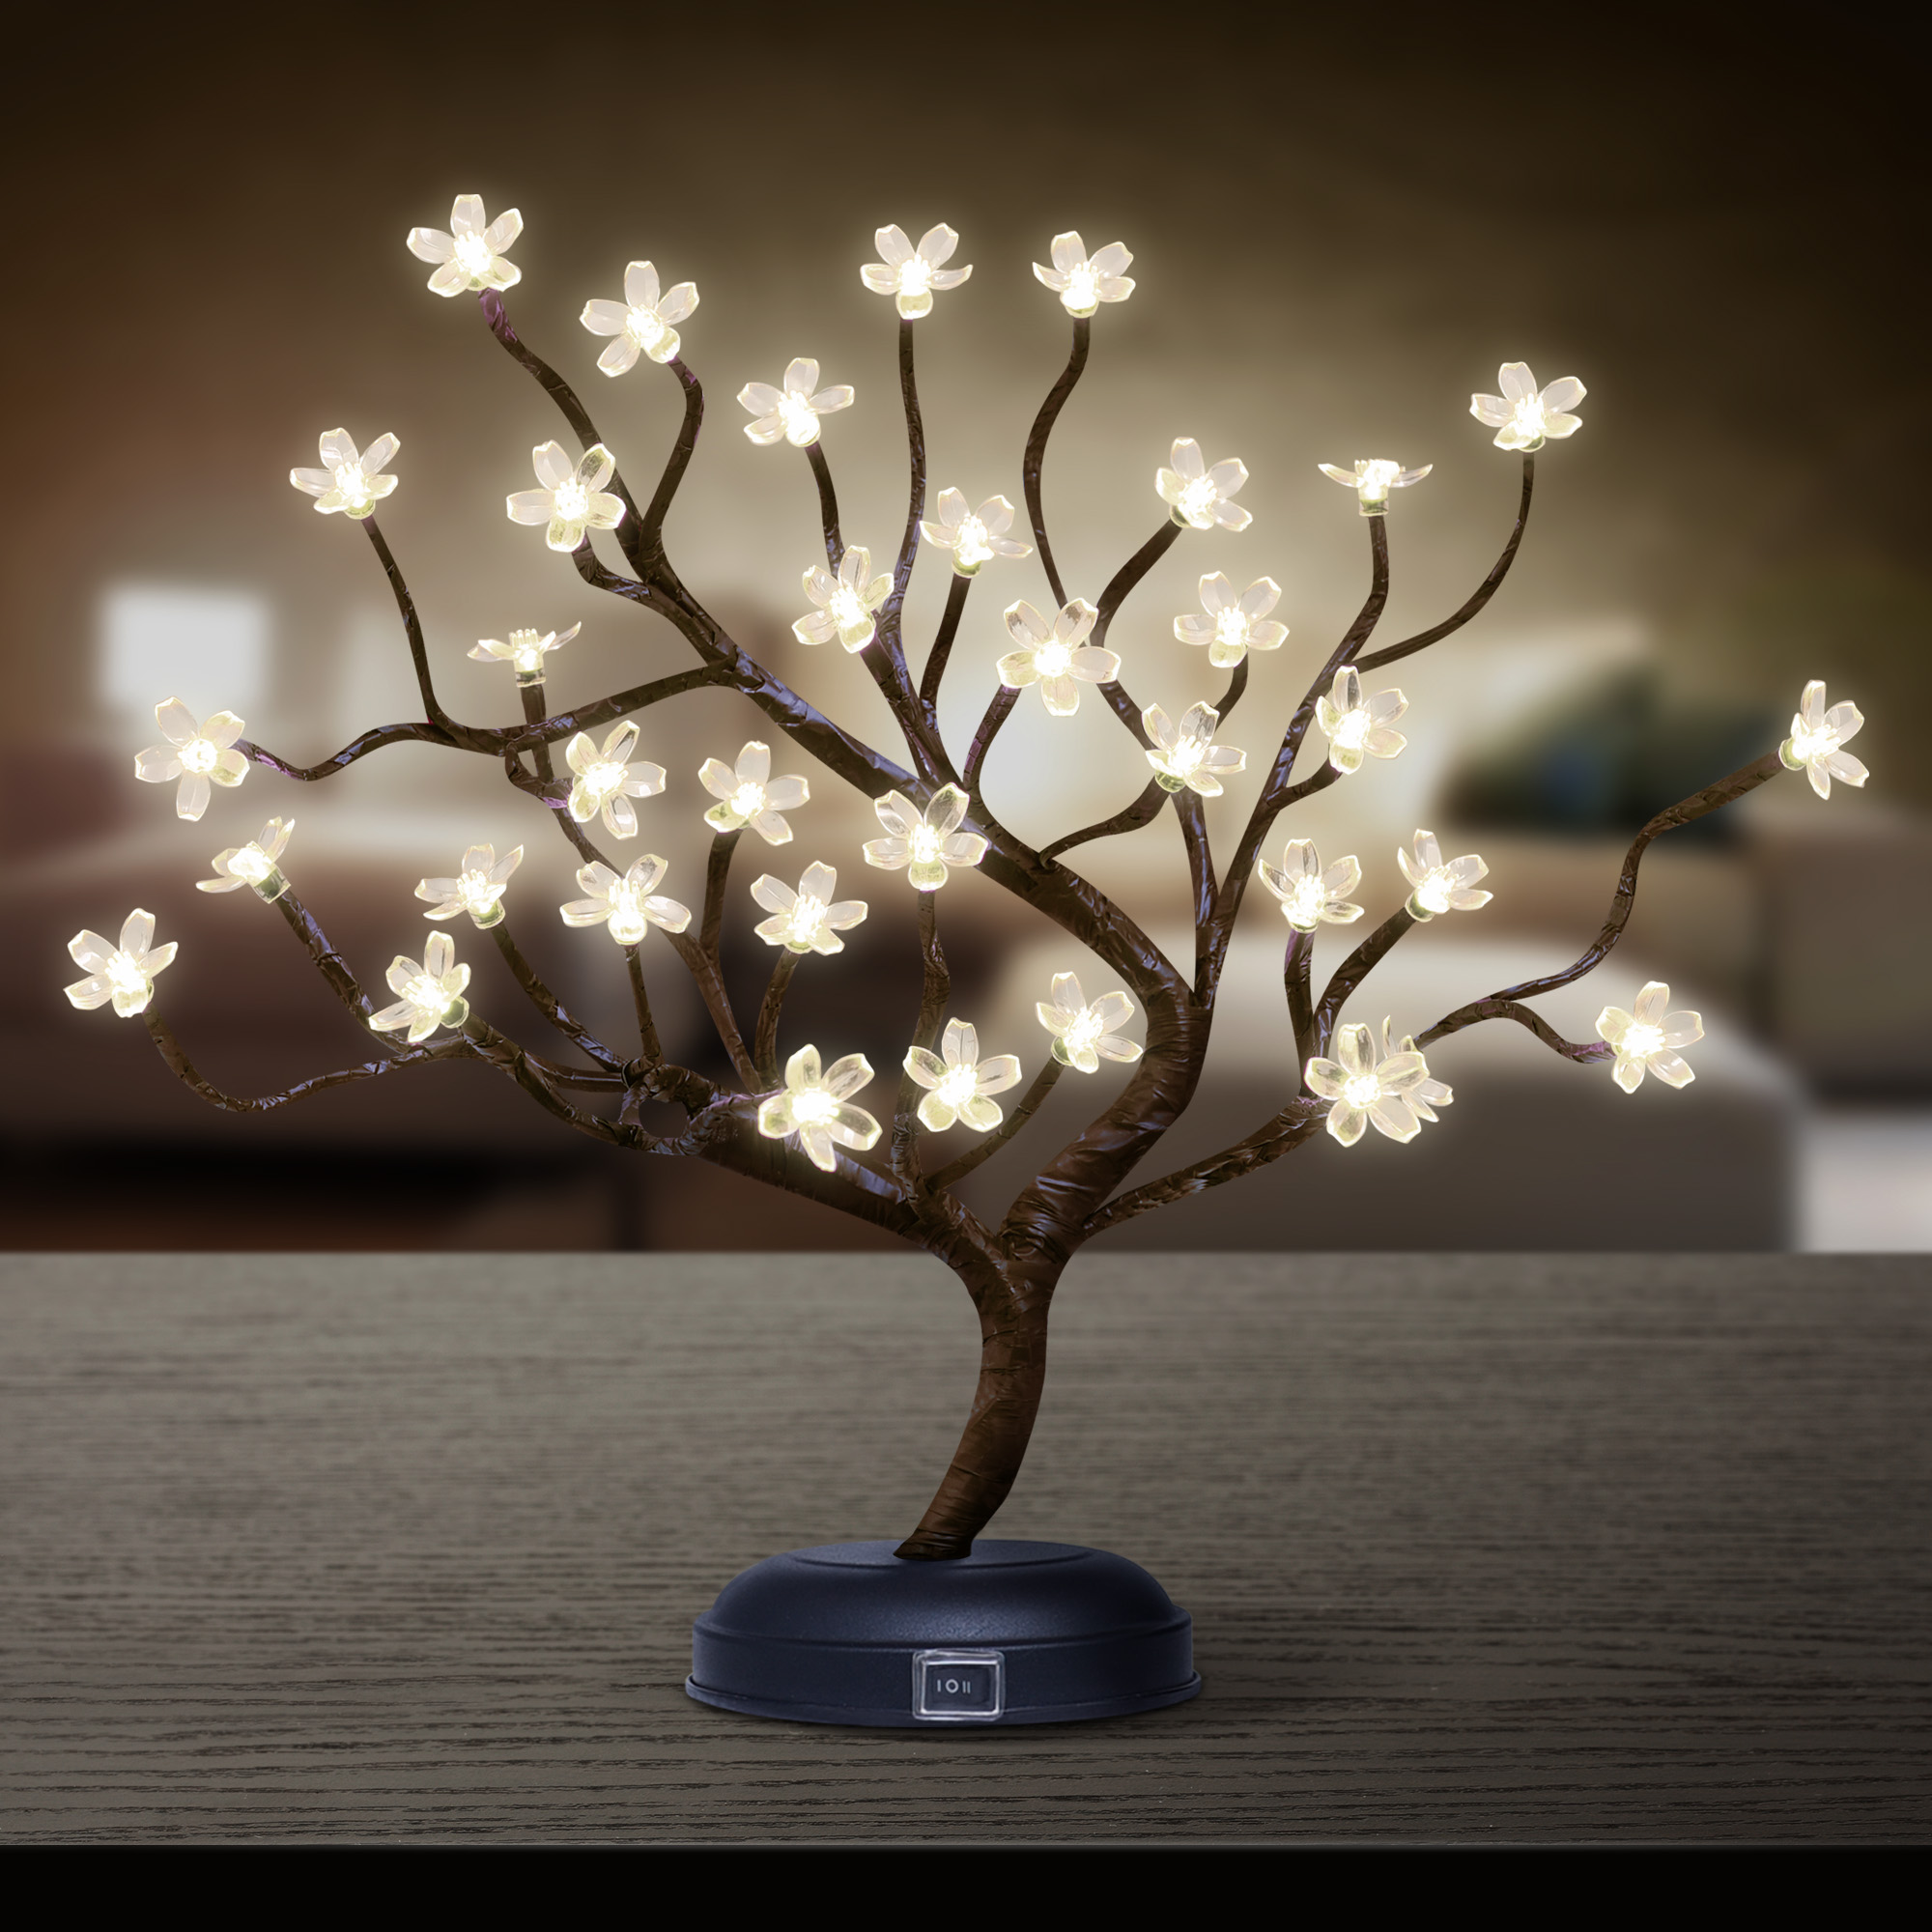 16IN Cherry Blossom Tree Lamp, Powered by Batteries & Adapter (included), Built-in timer-LIGHTSHARE